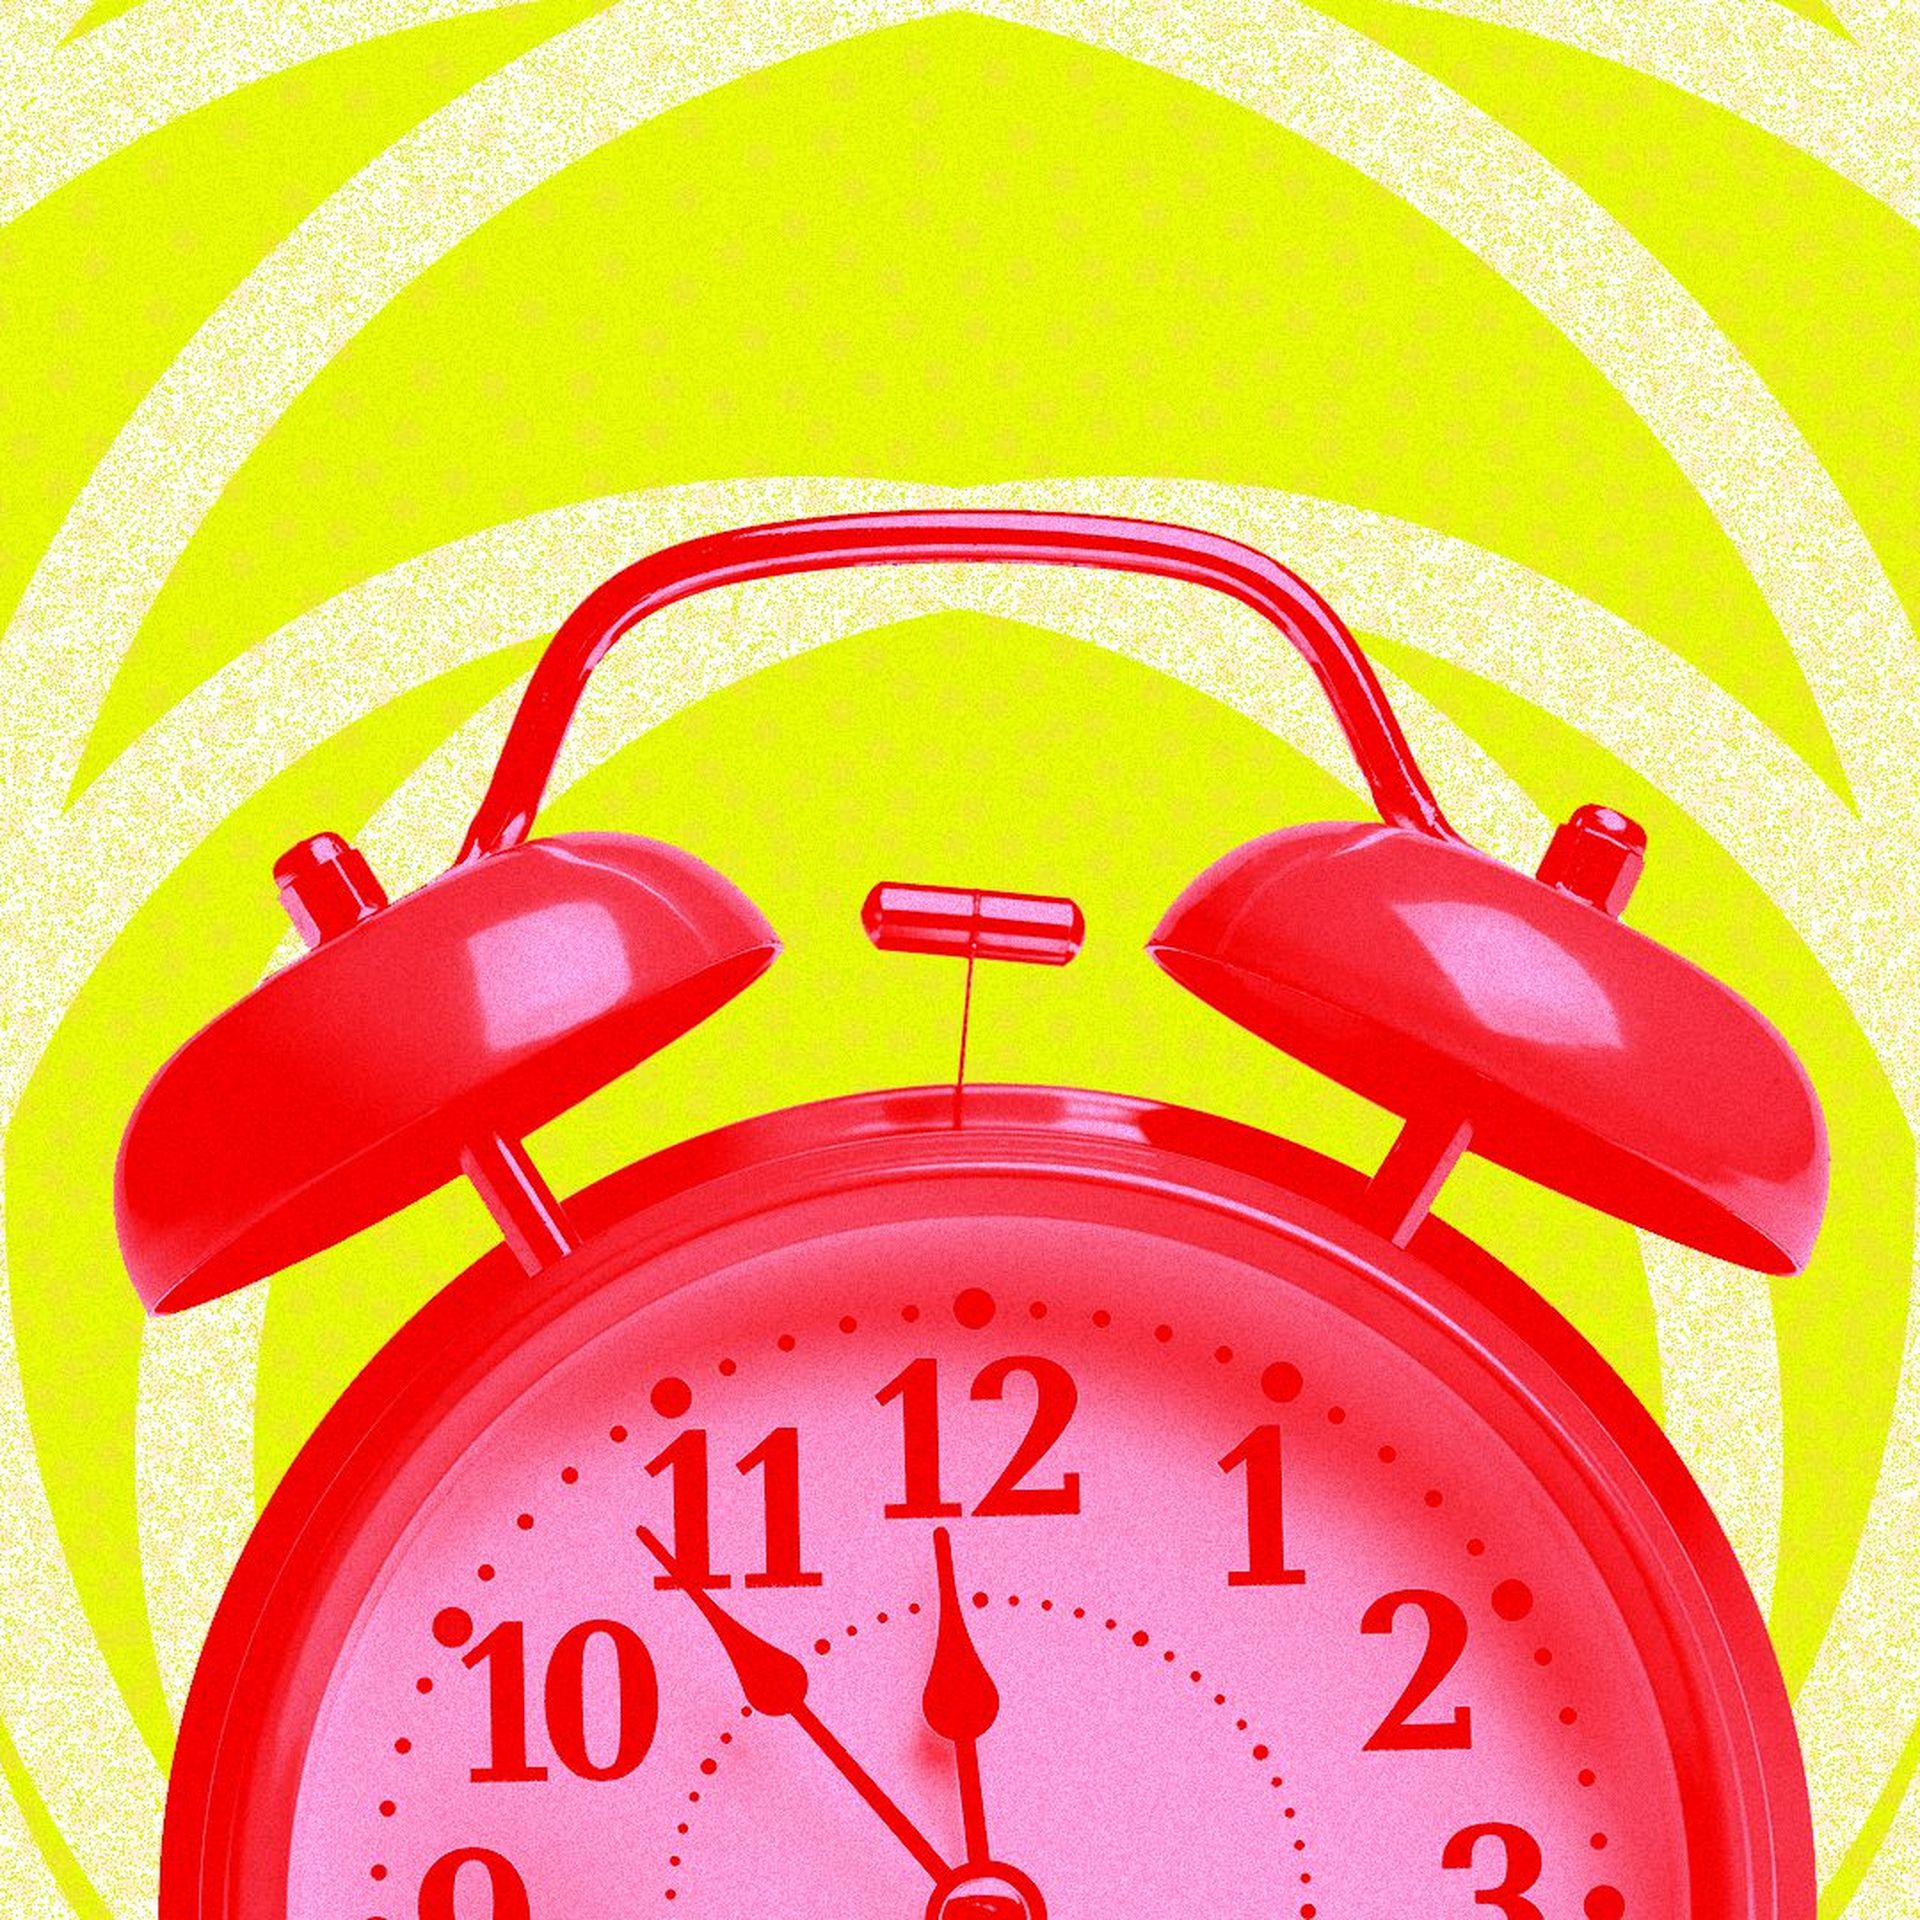 Illustration of a red alarm clock with graphic shapes in the background